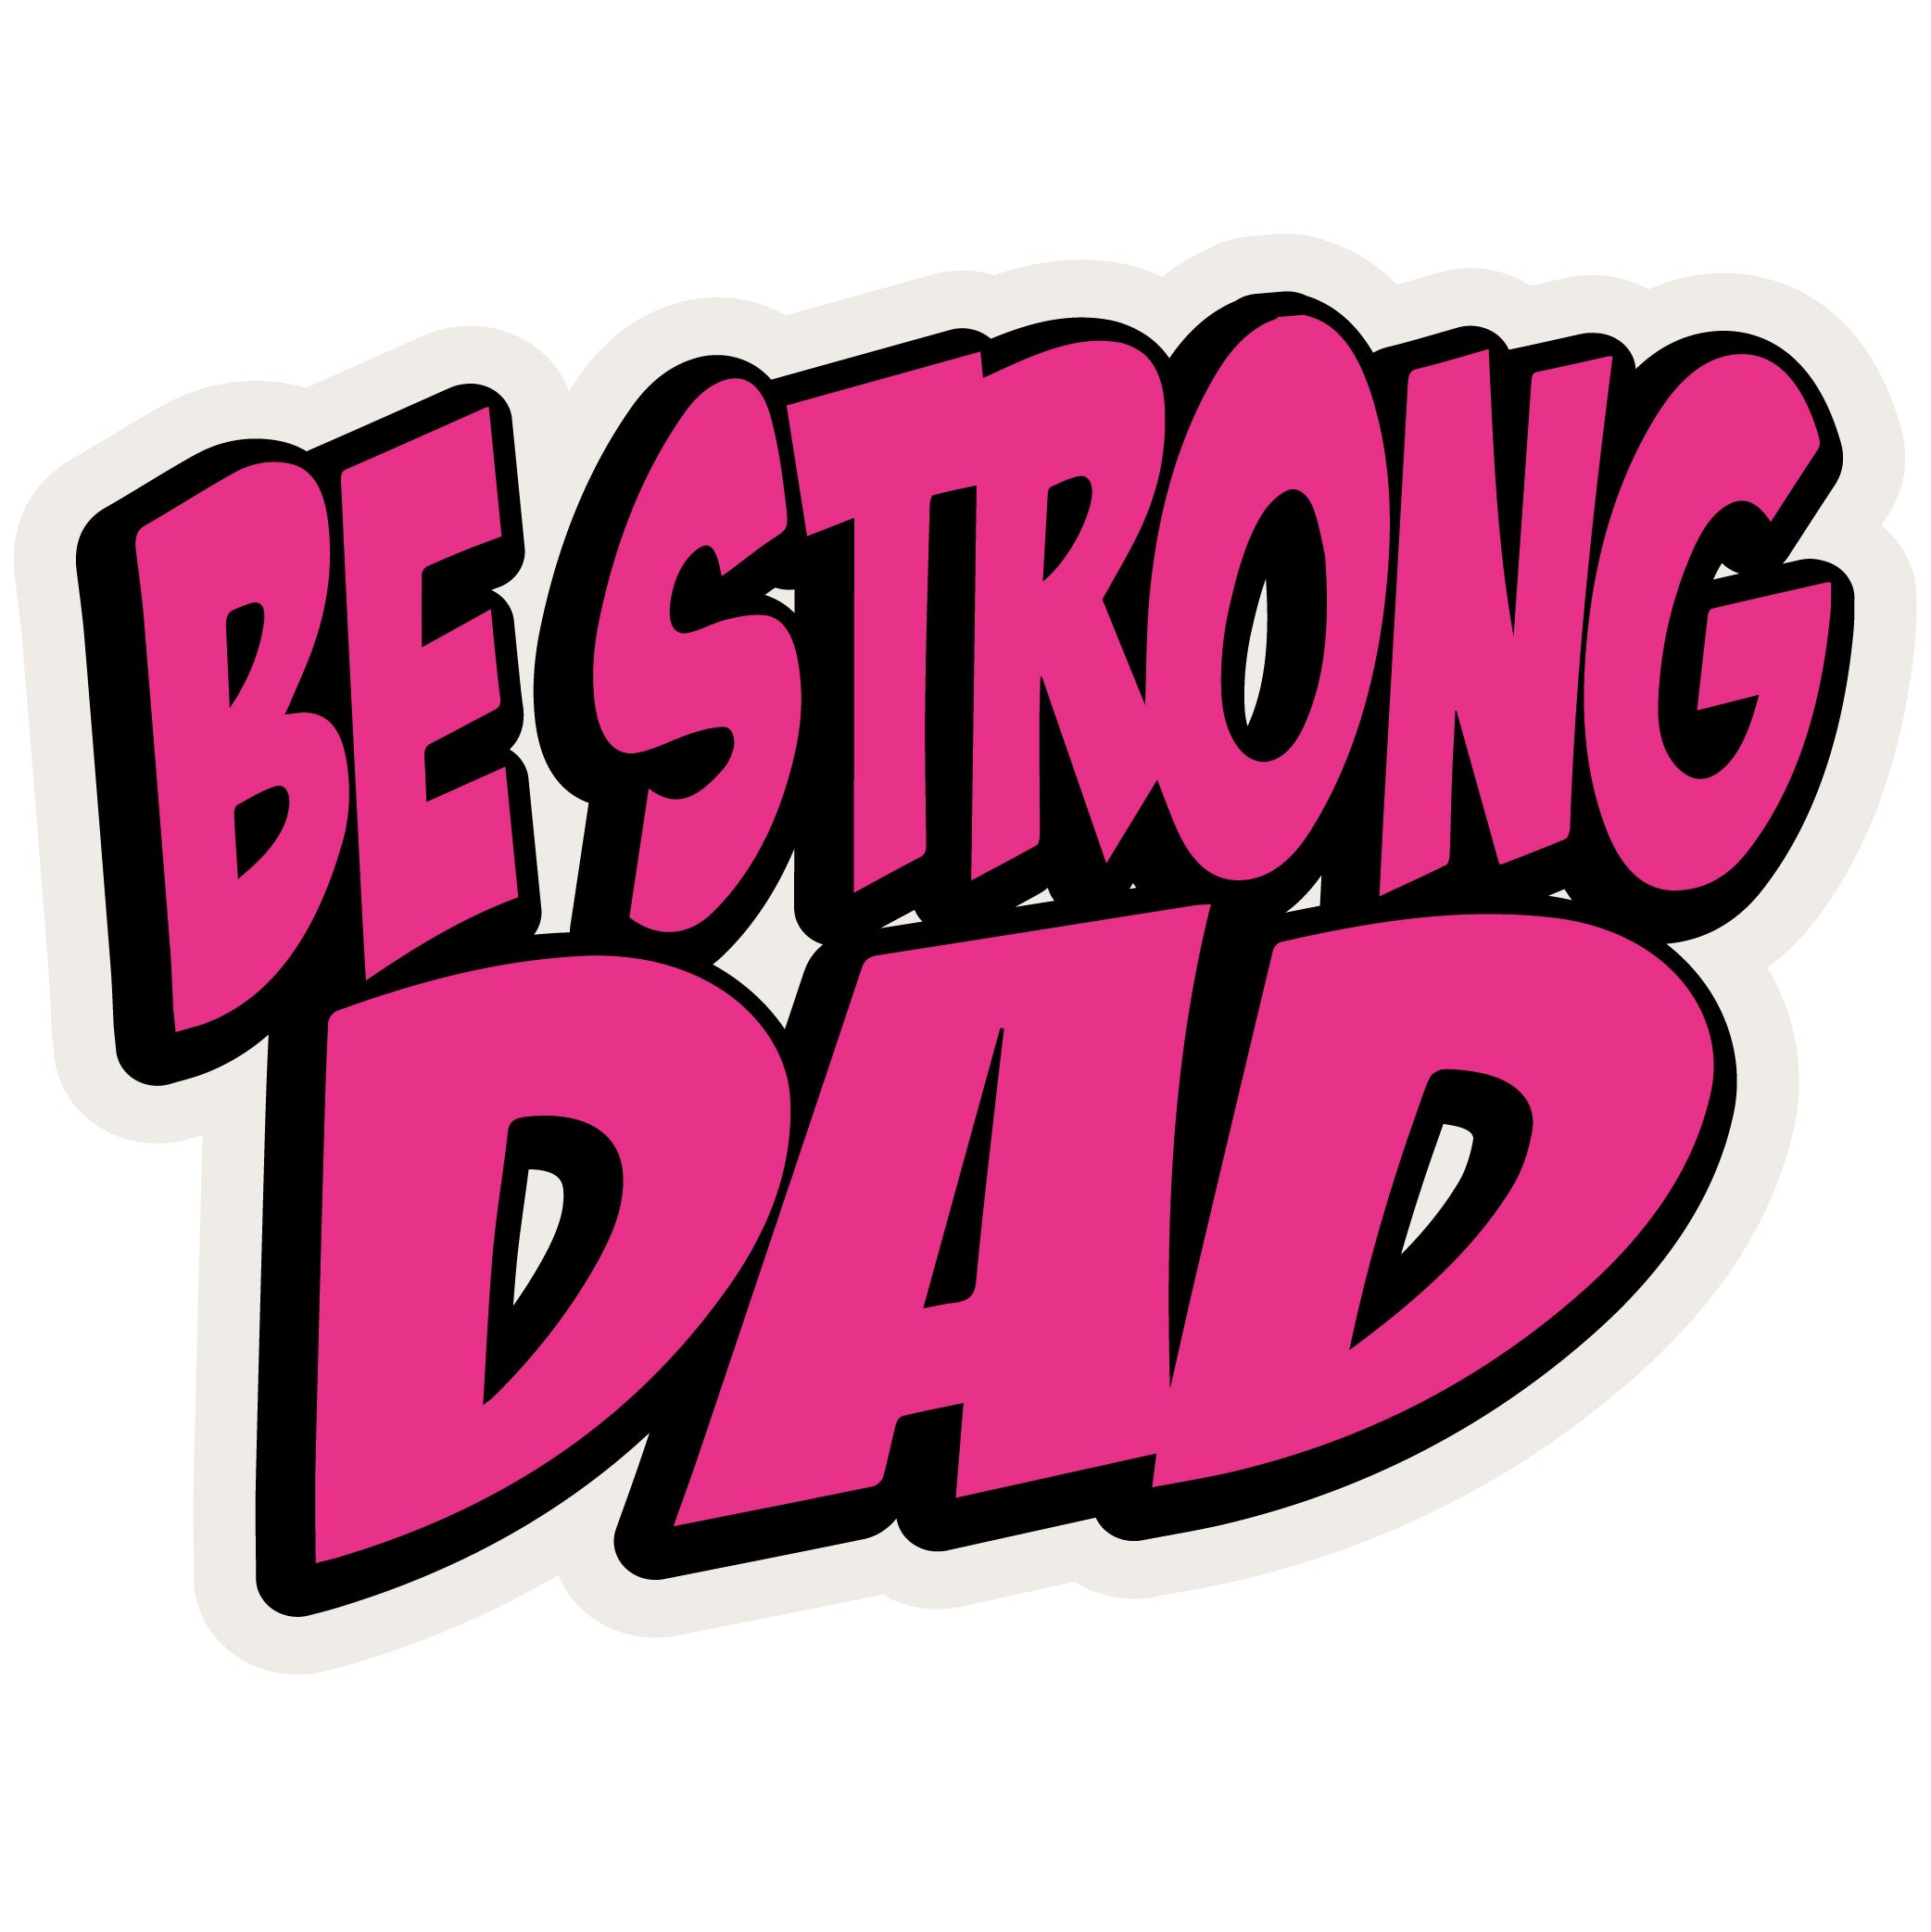 Buttpatch "Be Strong"